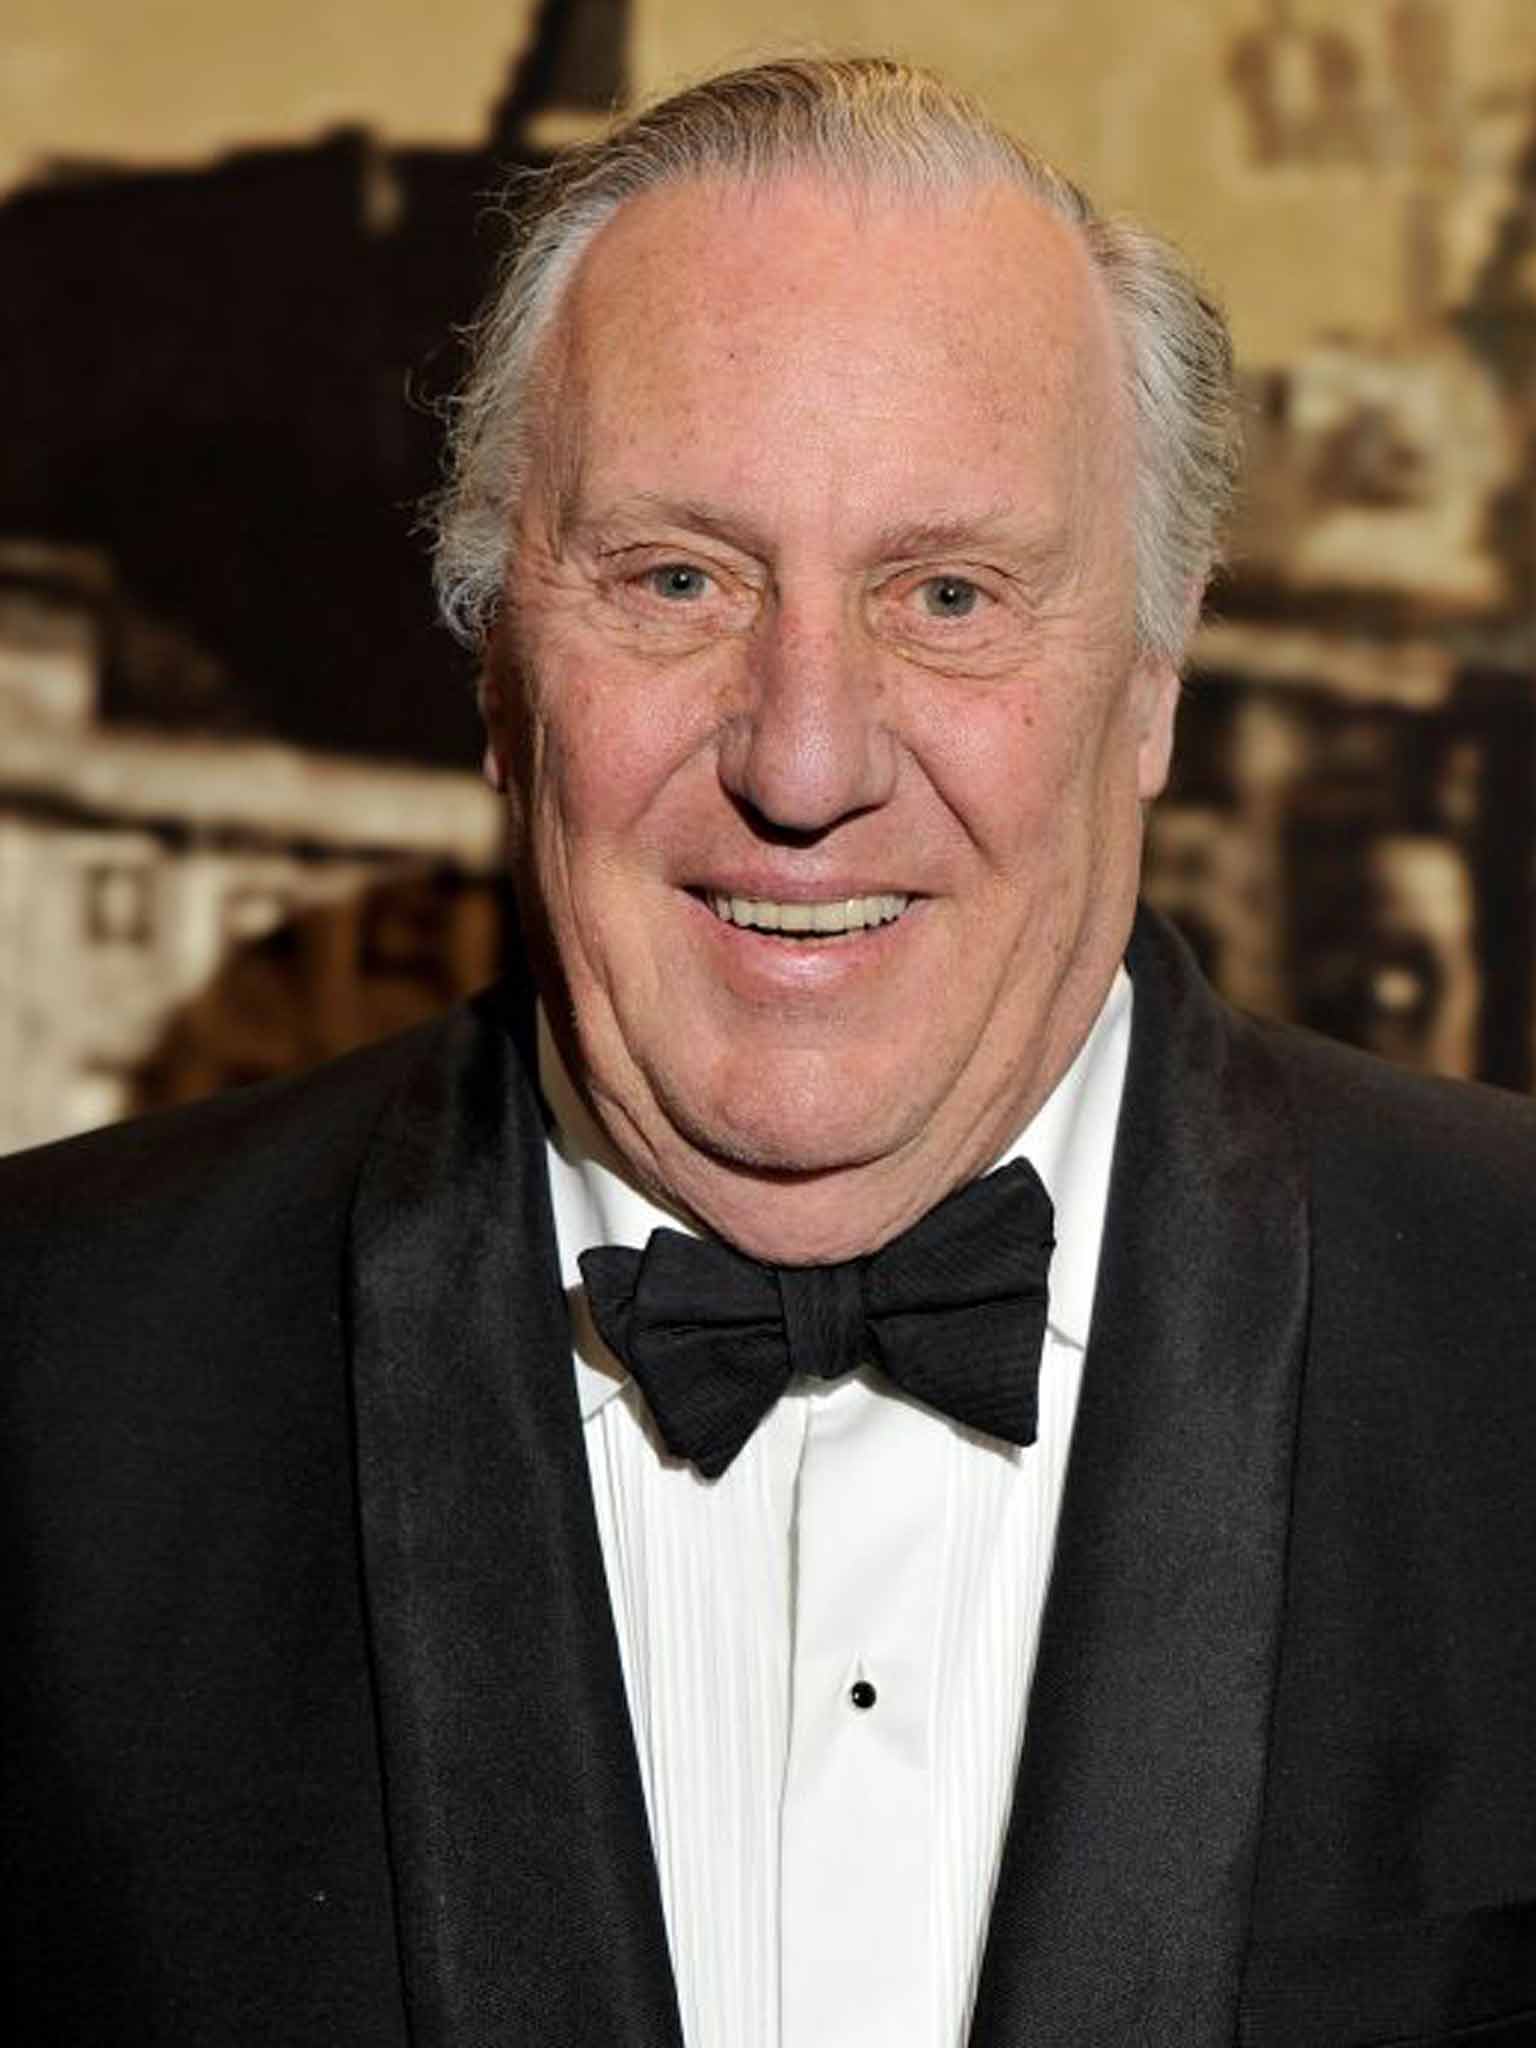 Frederick Forsyth worked undercover during his time at the BBC